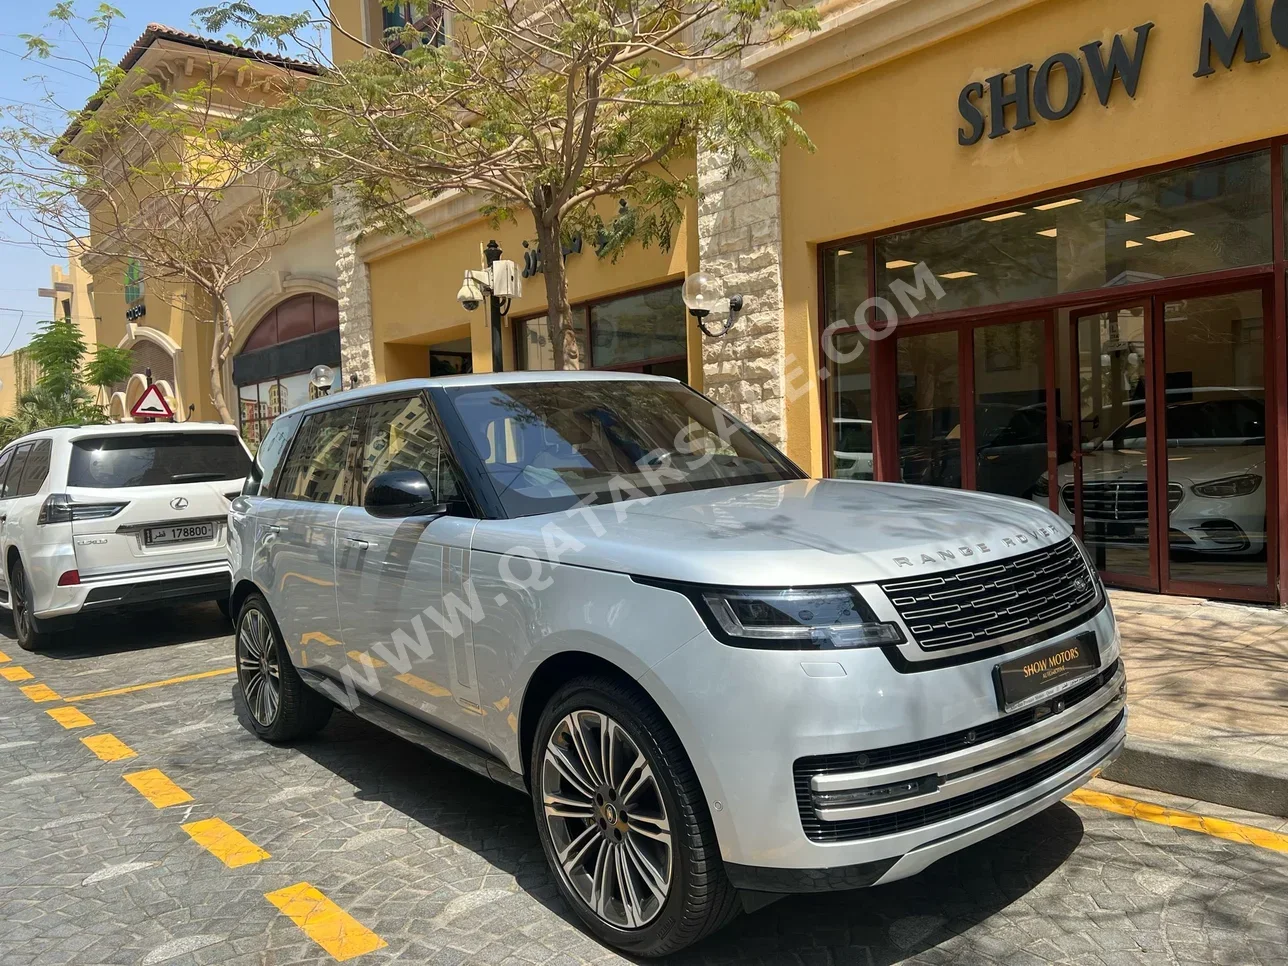 Land Rover  Range Rover  Vogue  Autobiography  2023  Automatic  0 Km  8 Cylinder  Four Wheel Drive (4WD)  SUV  Silver  With Warranty